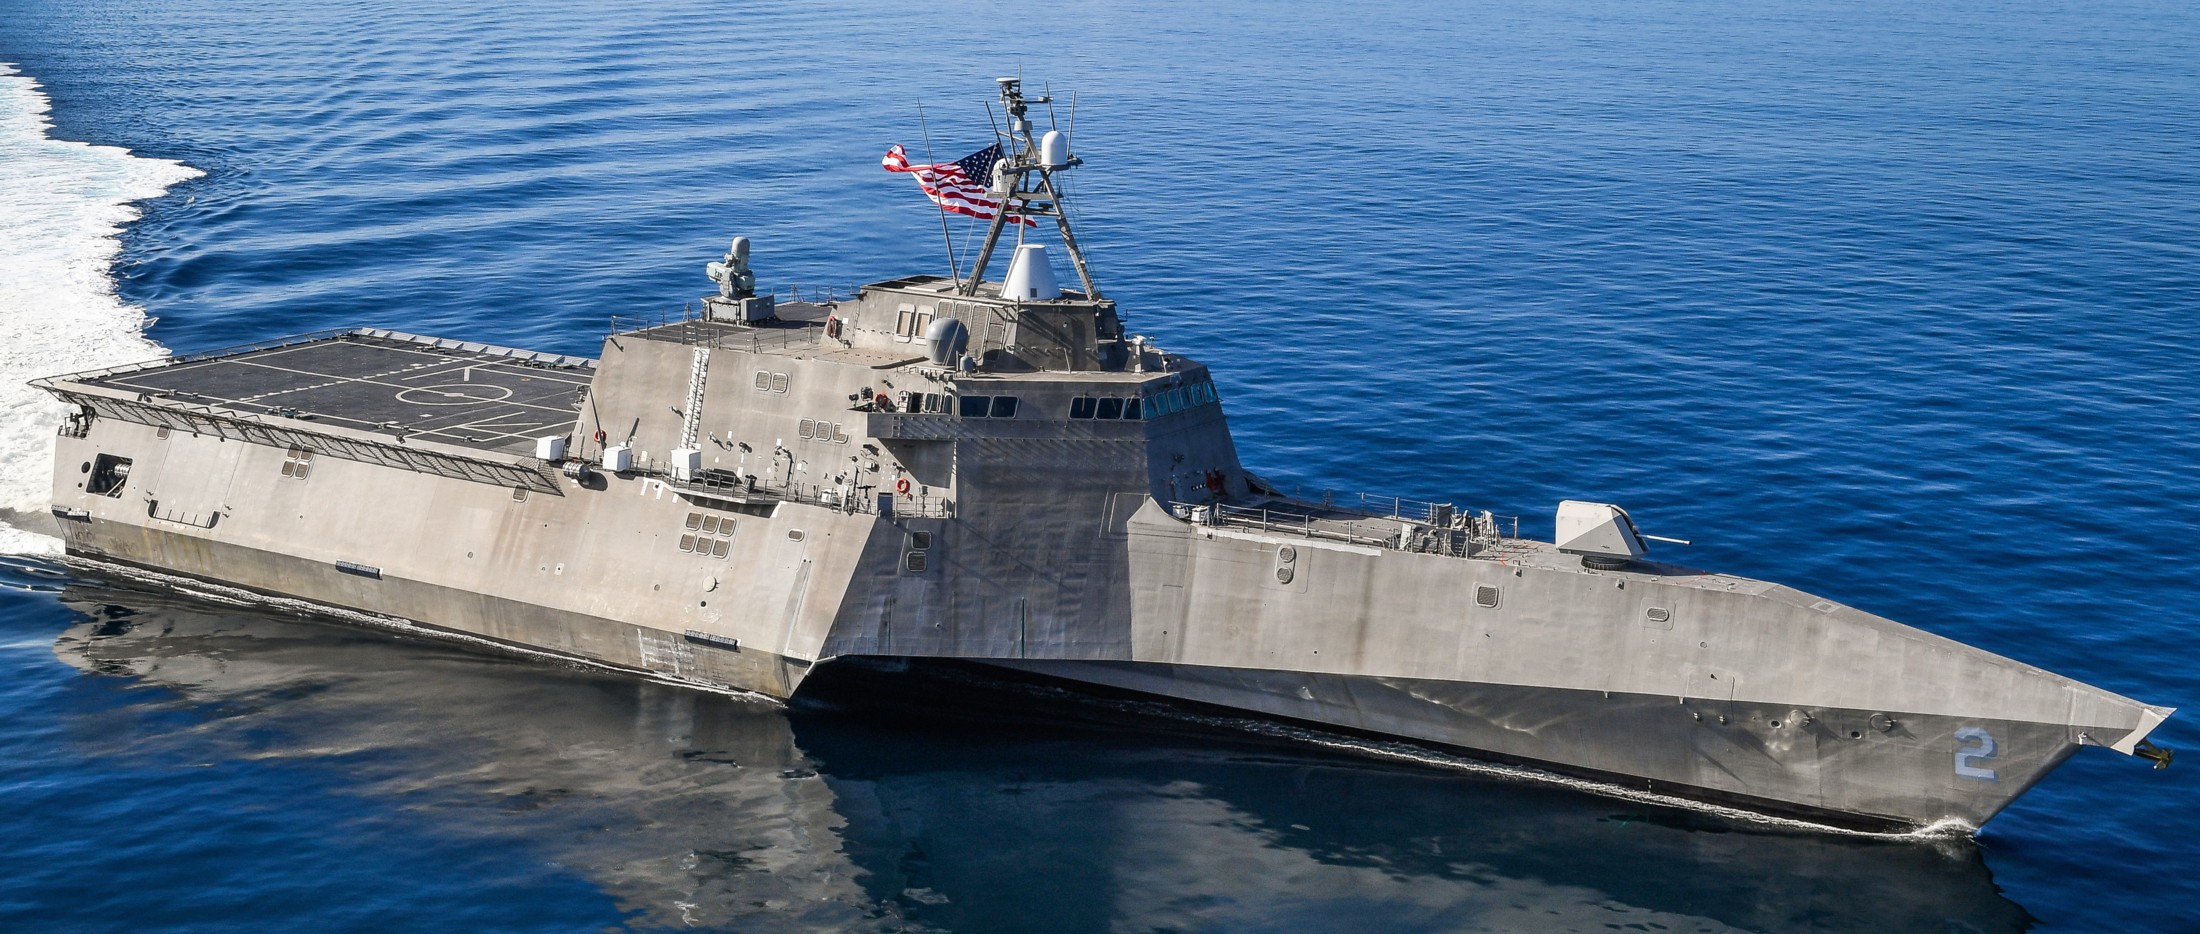 lcs-2 uss independence littoral combat ship us navy class 11